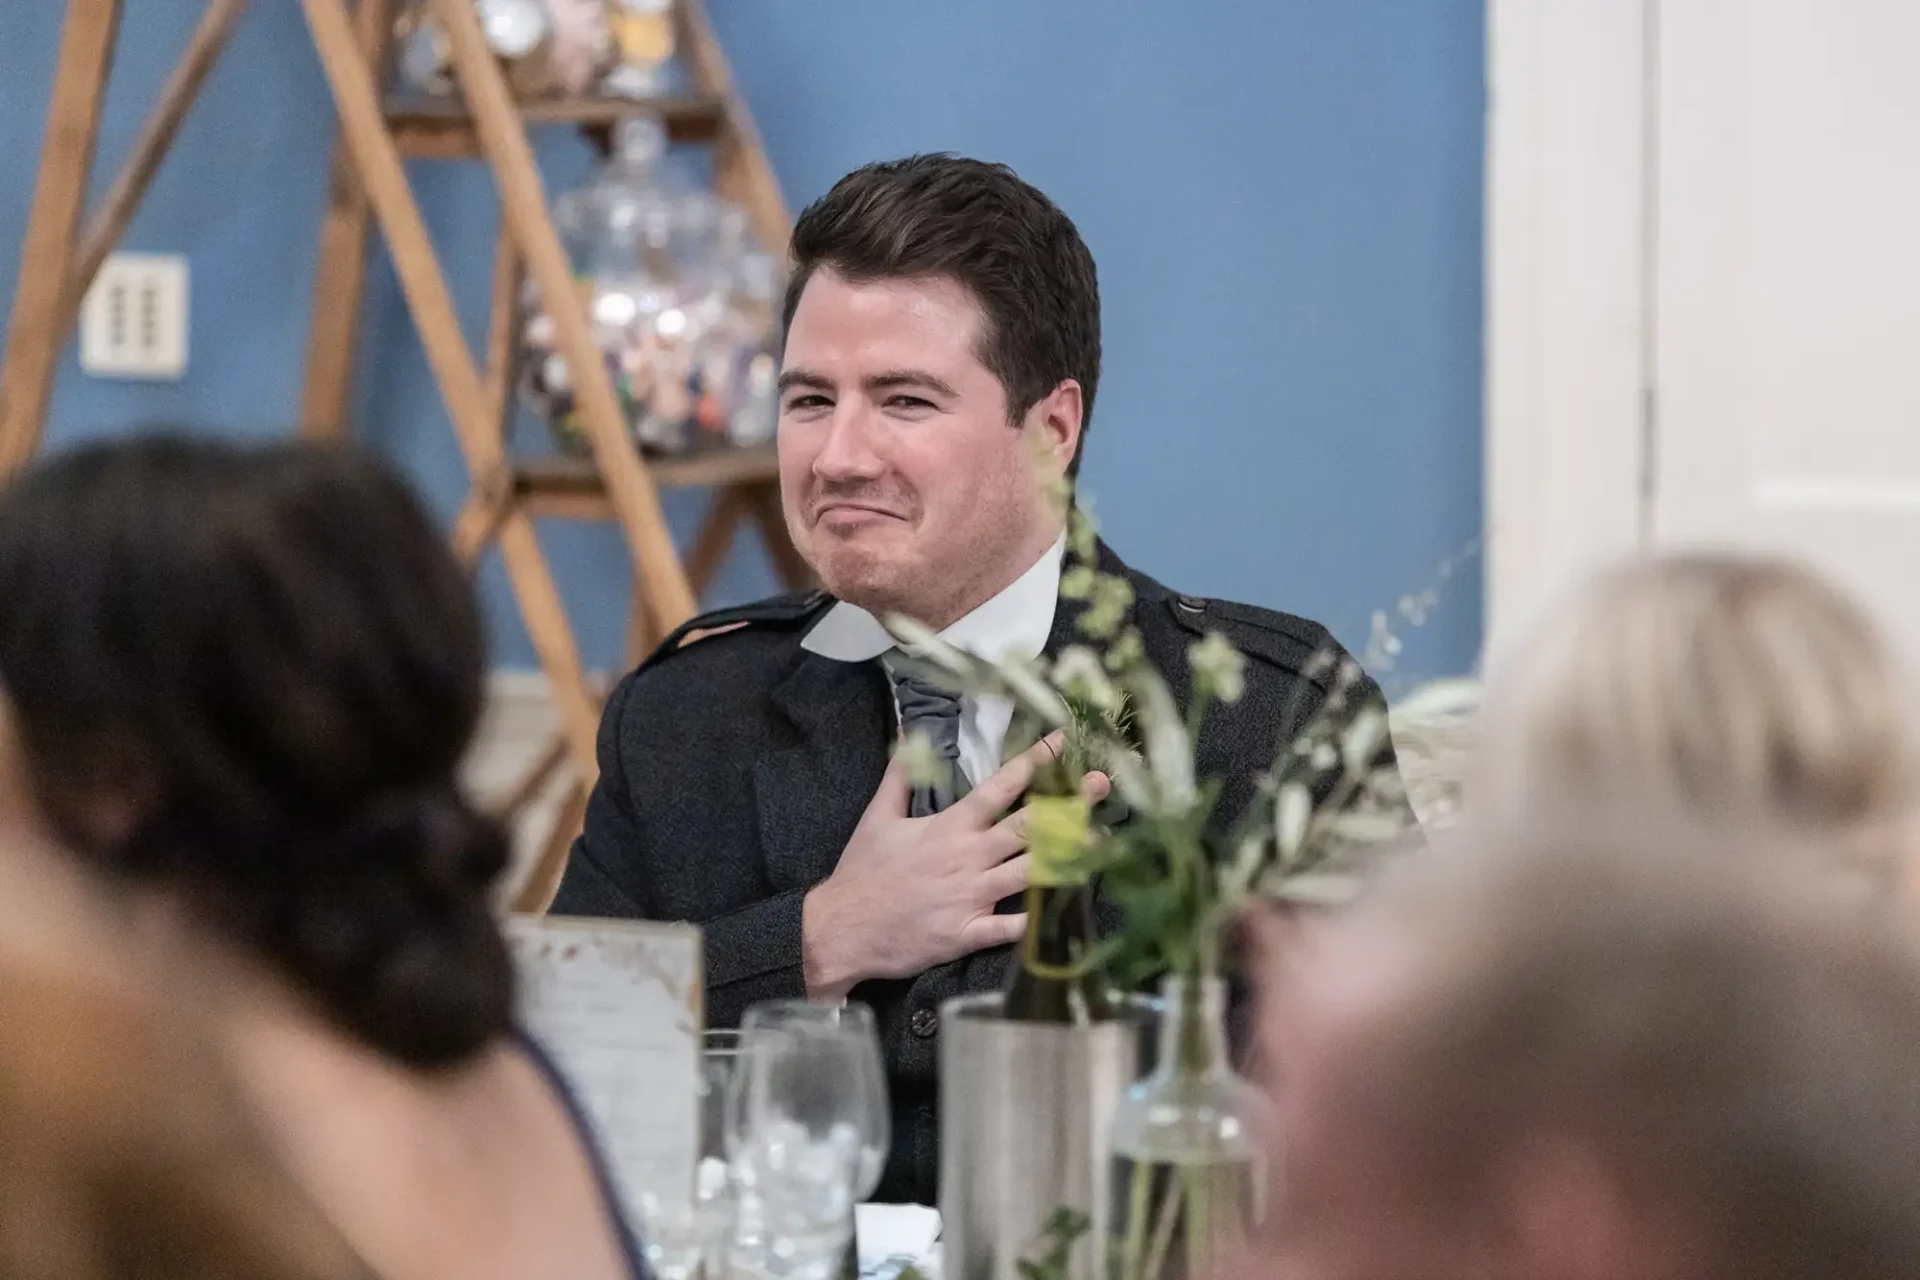 A man in a dark suit making a heartwarming gesture and smiling at a wedding reception table.